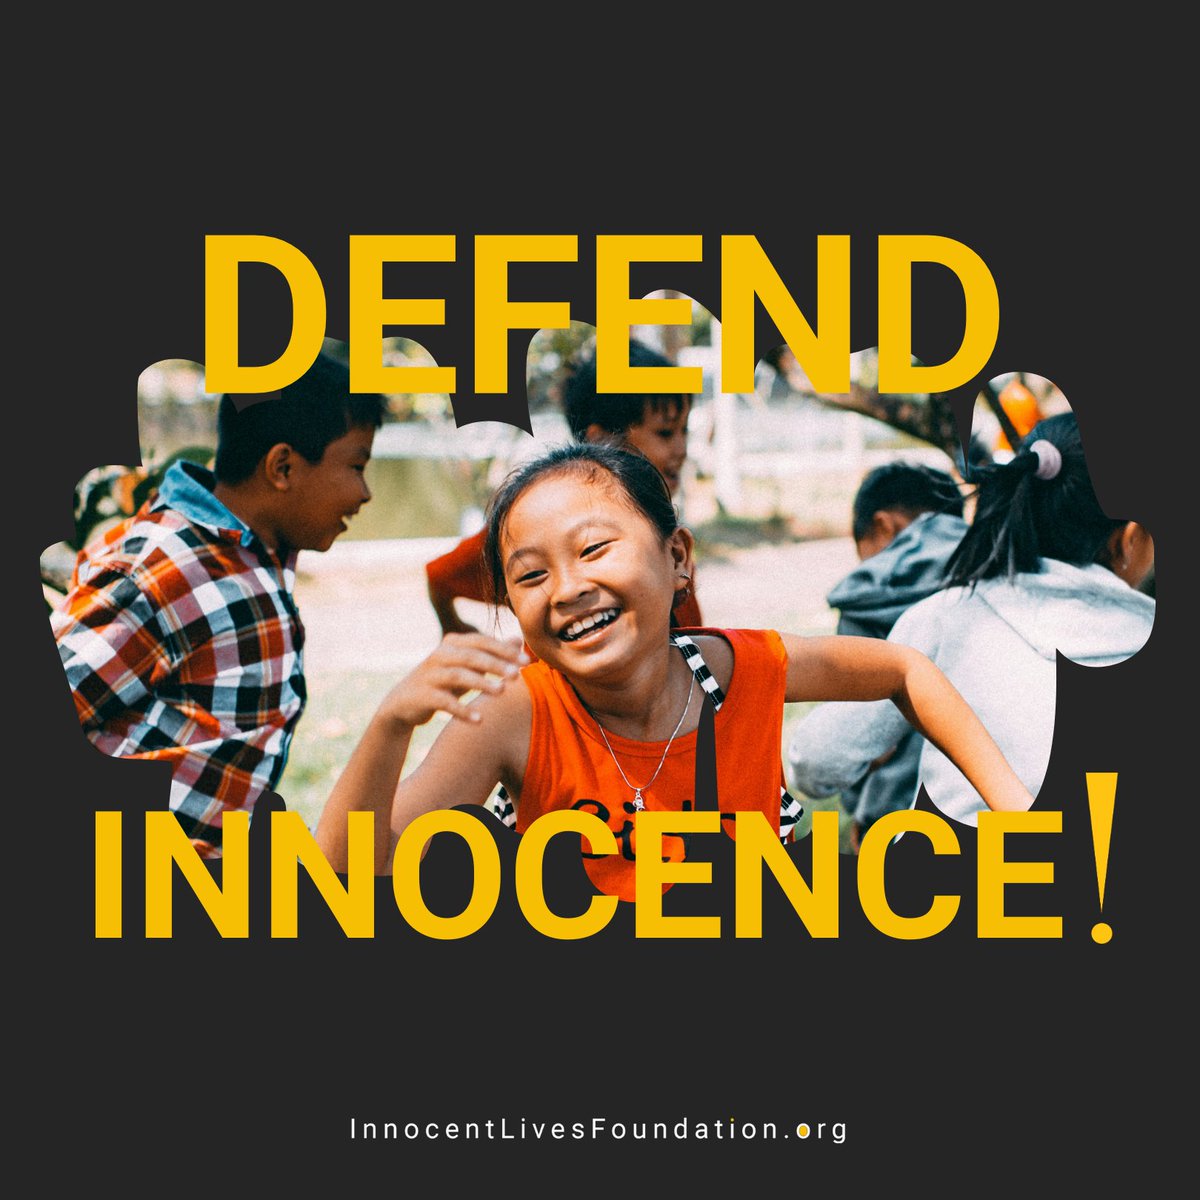 Children should enjoy happy, loving, and abuse-free childhoods! By joining in our shared mission you help to promote beautiful futures for them. Spread this uplifting message within your community. #defendinnocence #Iam4ILF